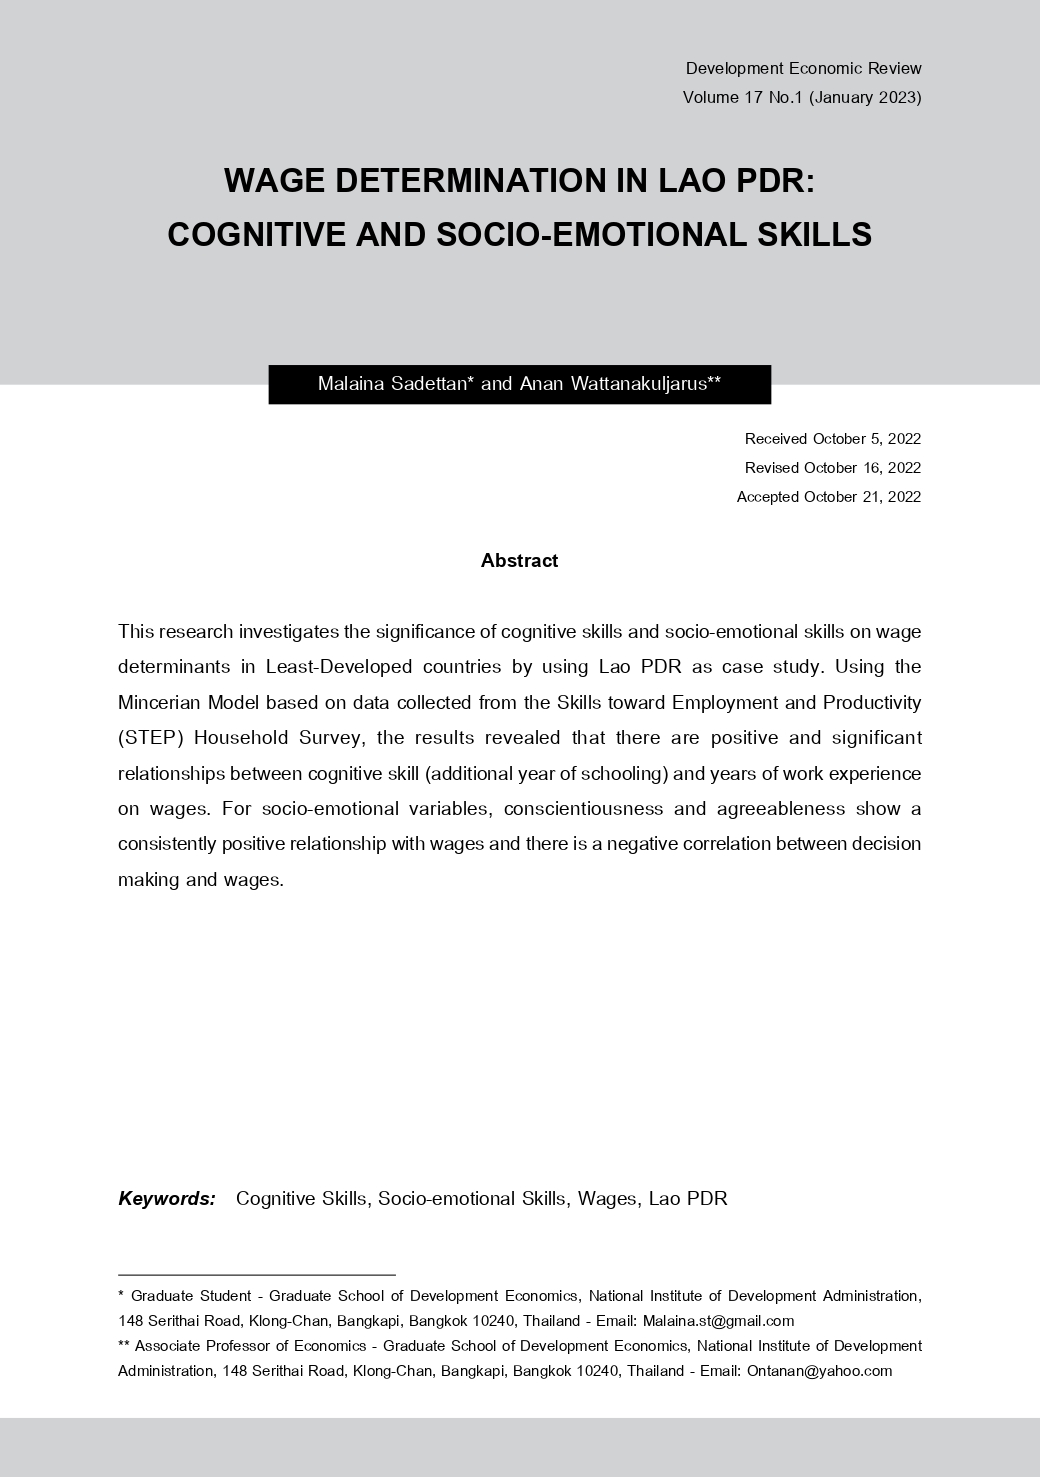 WAGE DETERMINATION IN LAO PDR : COGNITIVE AND SOCIO-EMOTIONAL SKILLS